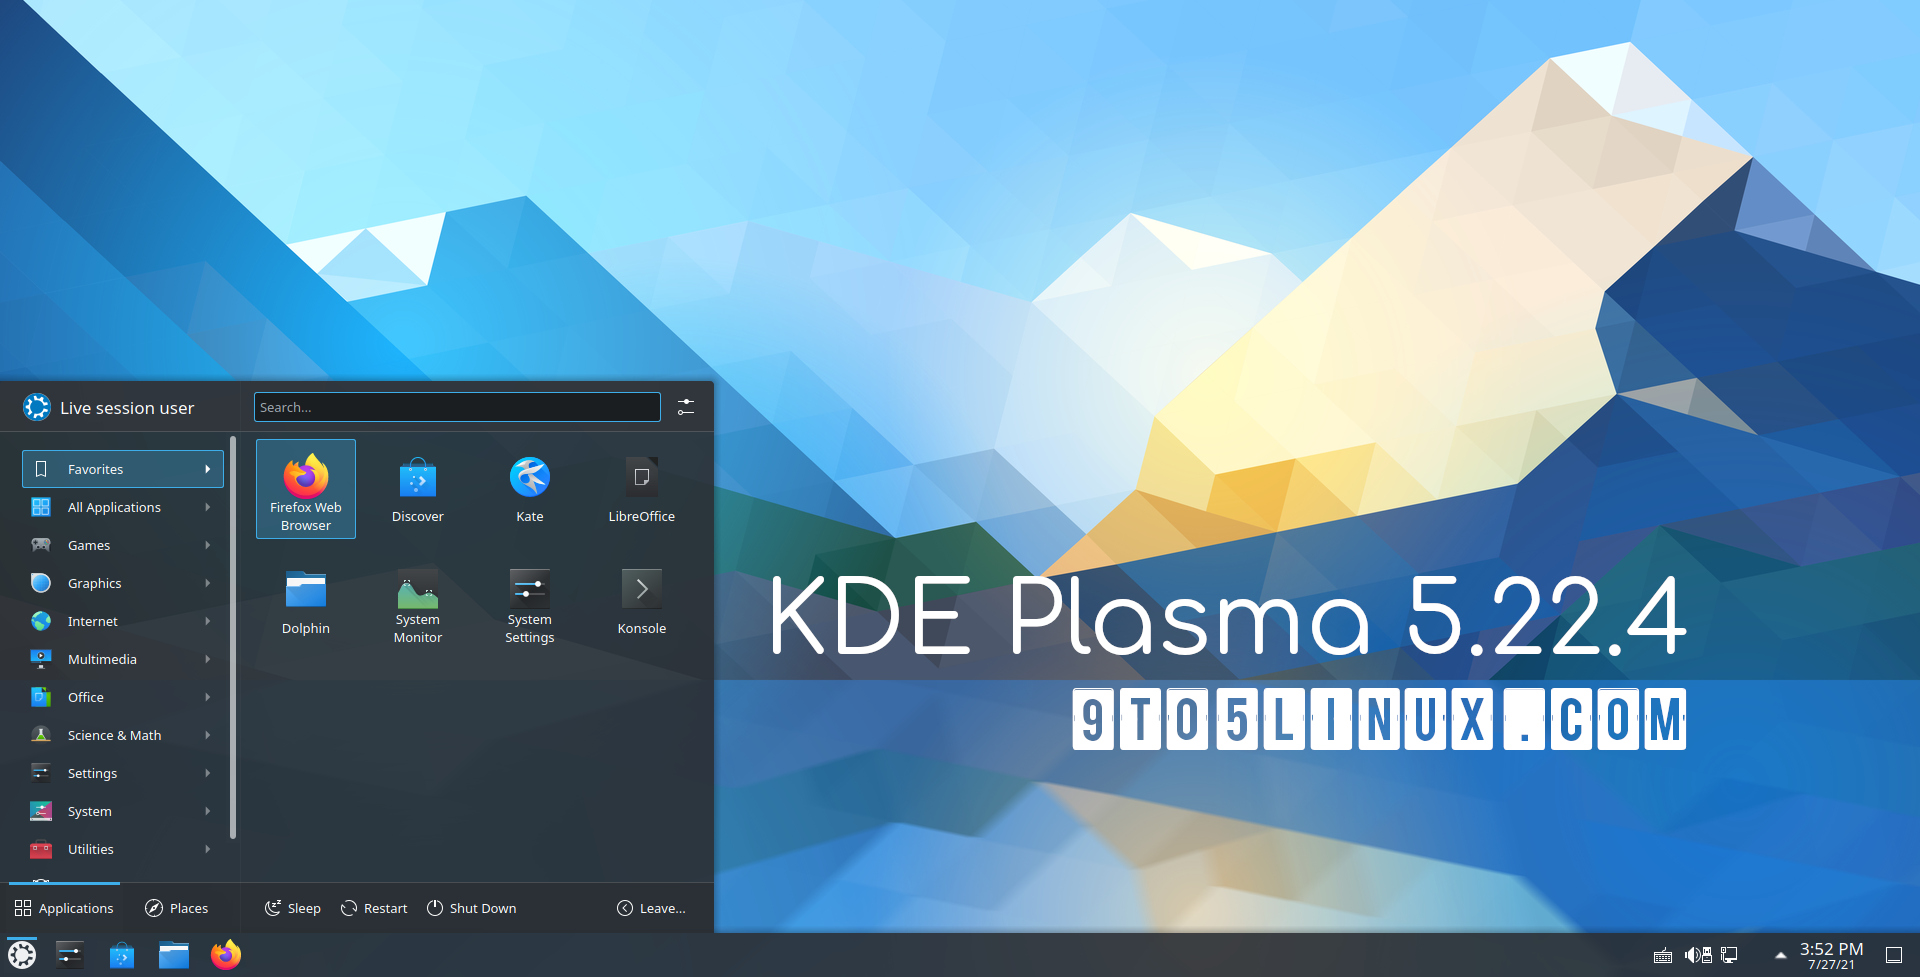 KDE Plasma 5.22.4 Further Improves Plasma Wayland, Makes System Monitor Faster to Launch